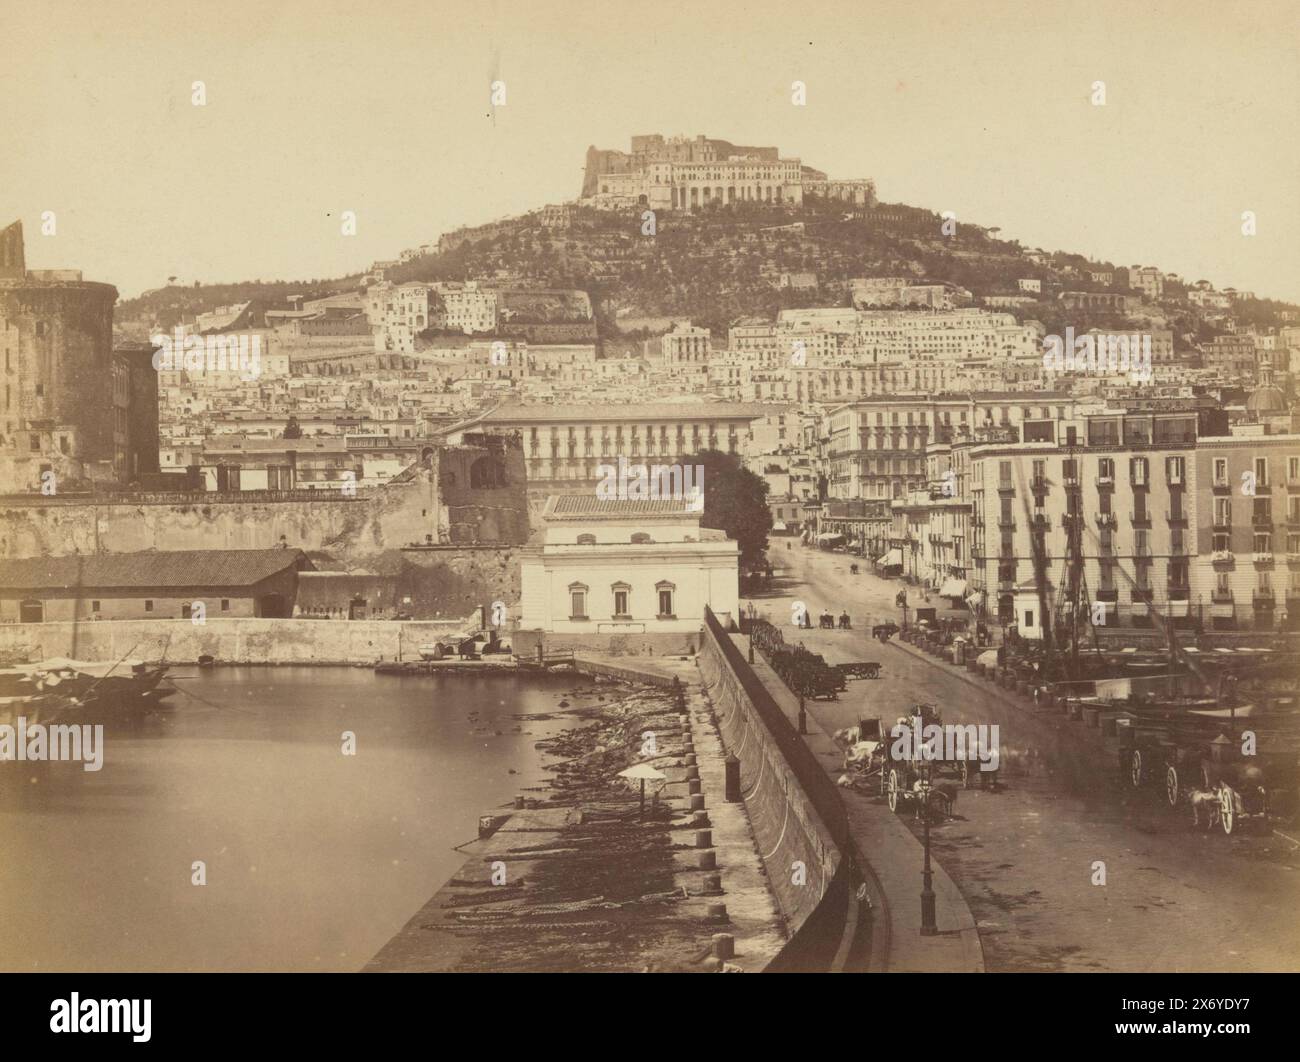 View of the Naples Wharf and the Castel Sant'Elmo, Molo e St. Martino - Napoli (title on object), photograph, Achille Mauri, (mentioned on object), Naples, c. 1851 - c. 1900, paper, albumen print, height, 213 mm × width, 271 mm, height, 223 mm × width, 280 mm Stock Photo